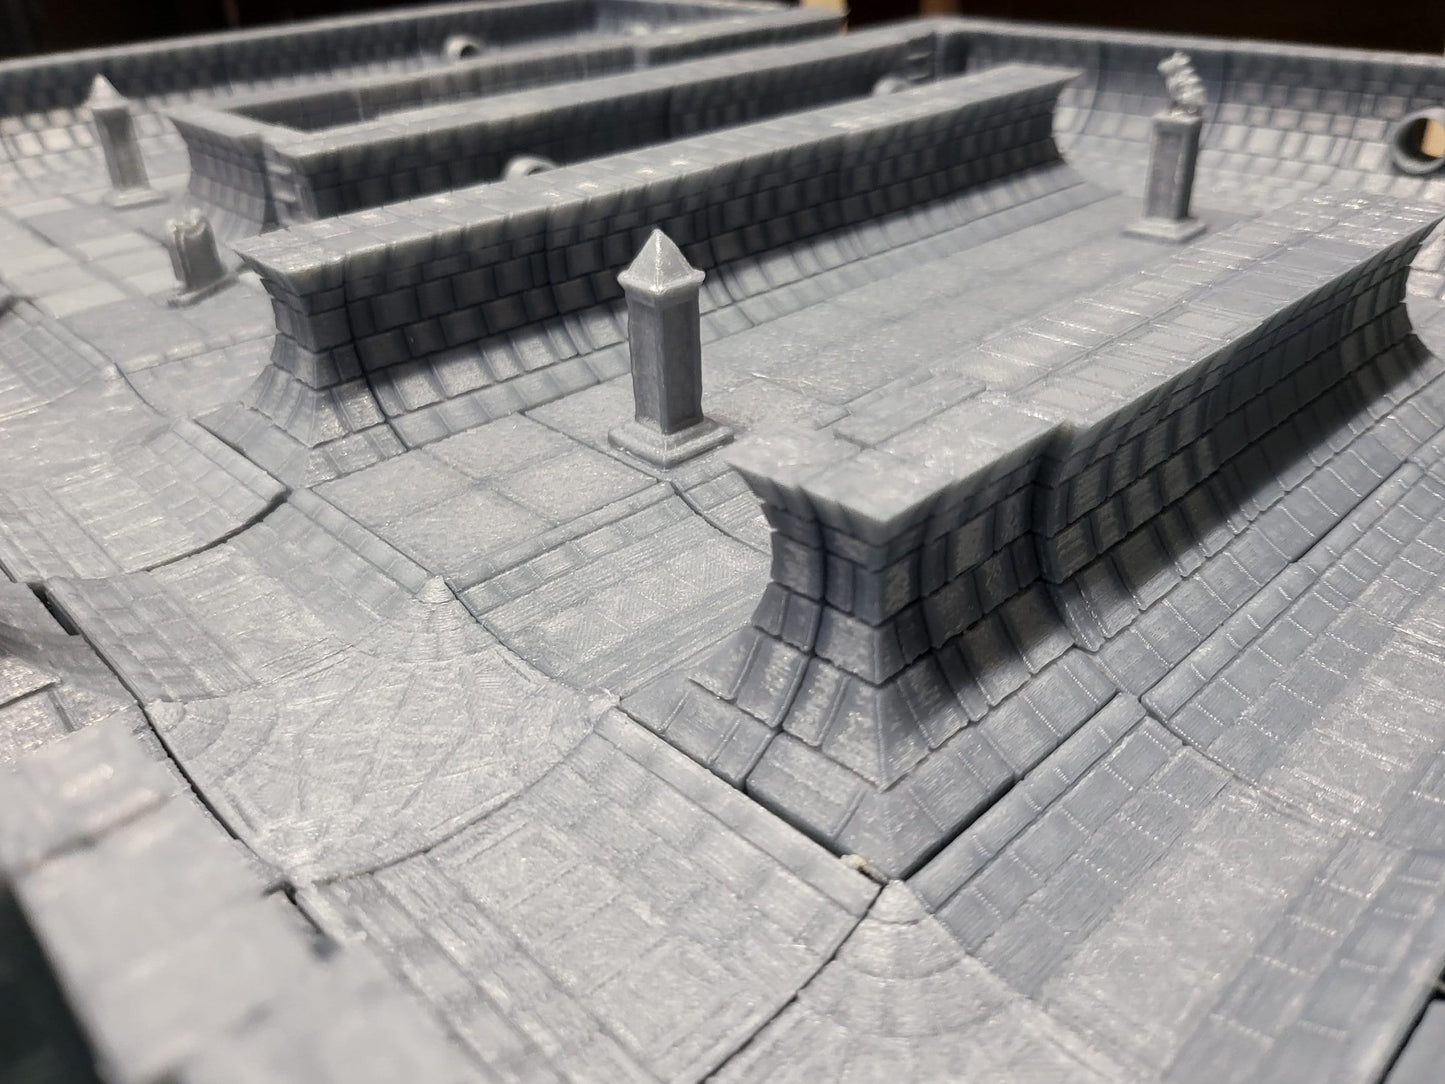 Sewer System, Underground adventure, sewer terrain, wargaming, dungeons and dragons, dungeon terrain, City sewer, Sub terrain, water pipes, pipe system, sewer way, sewer, 28mm terrain, tabletop terrain, tabletop gaming